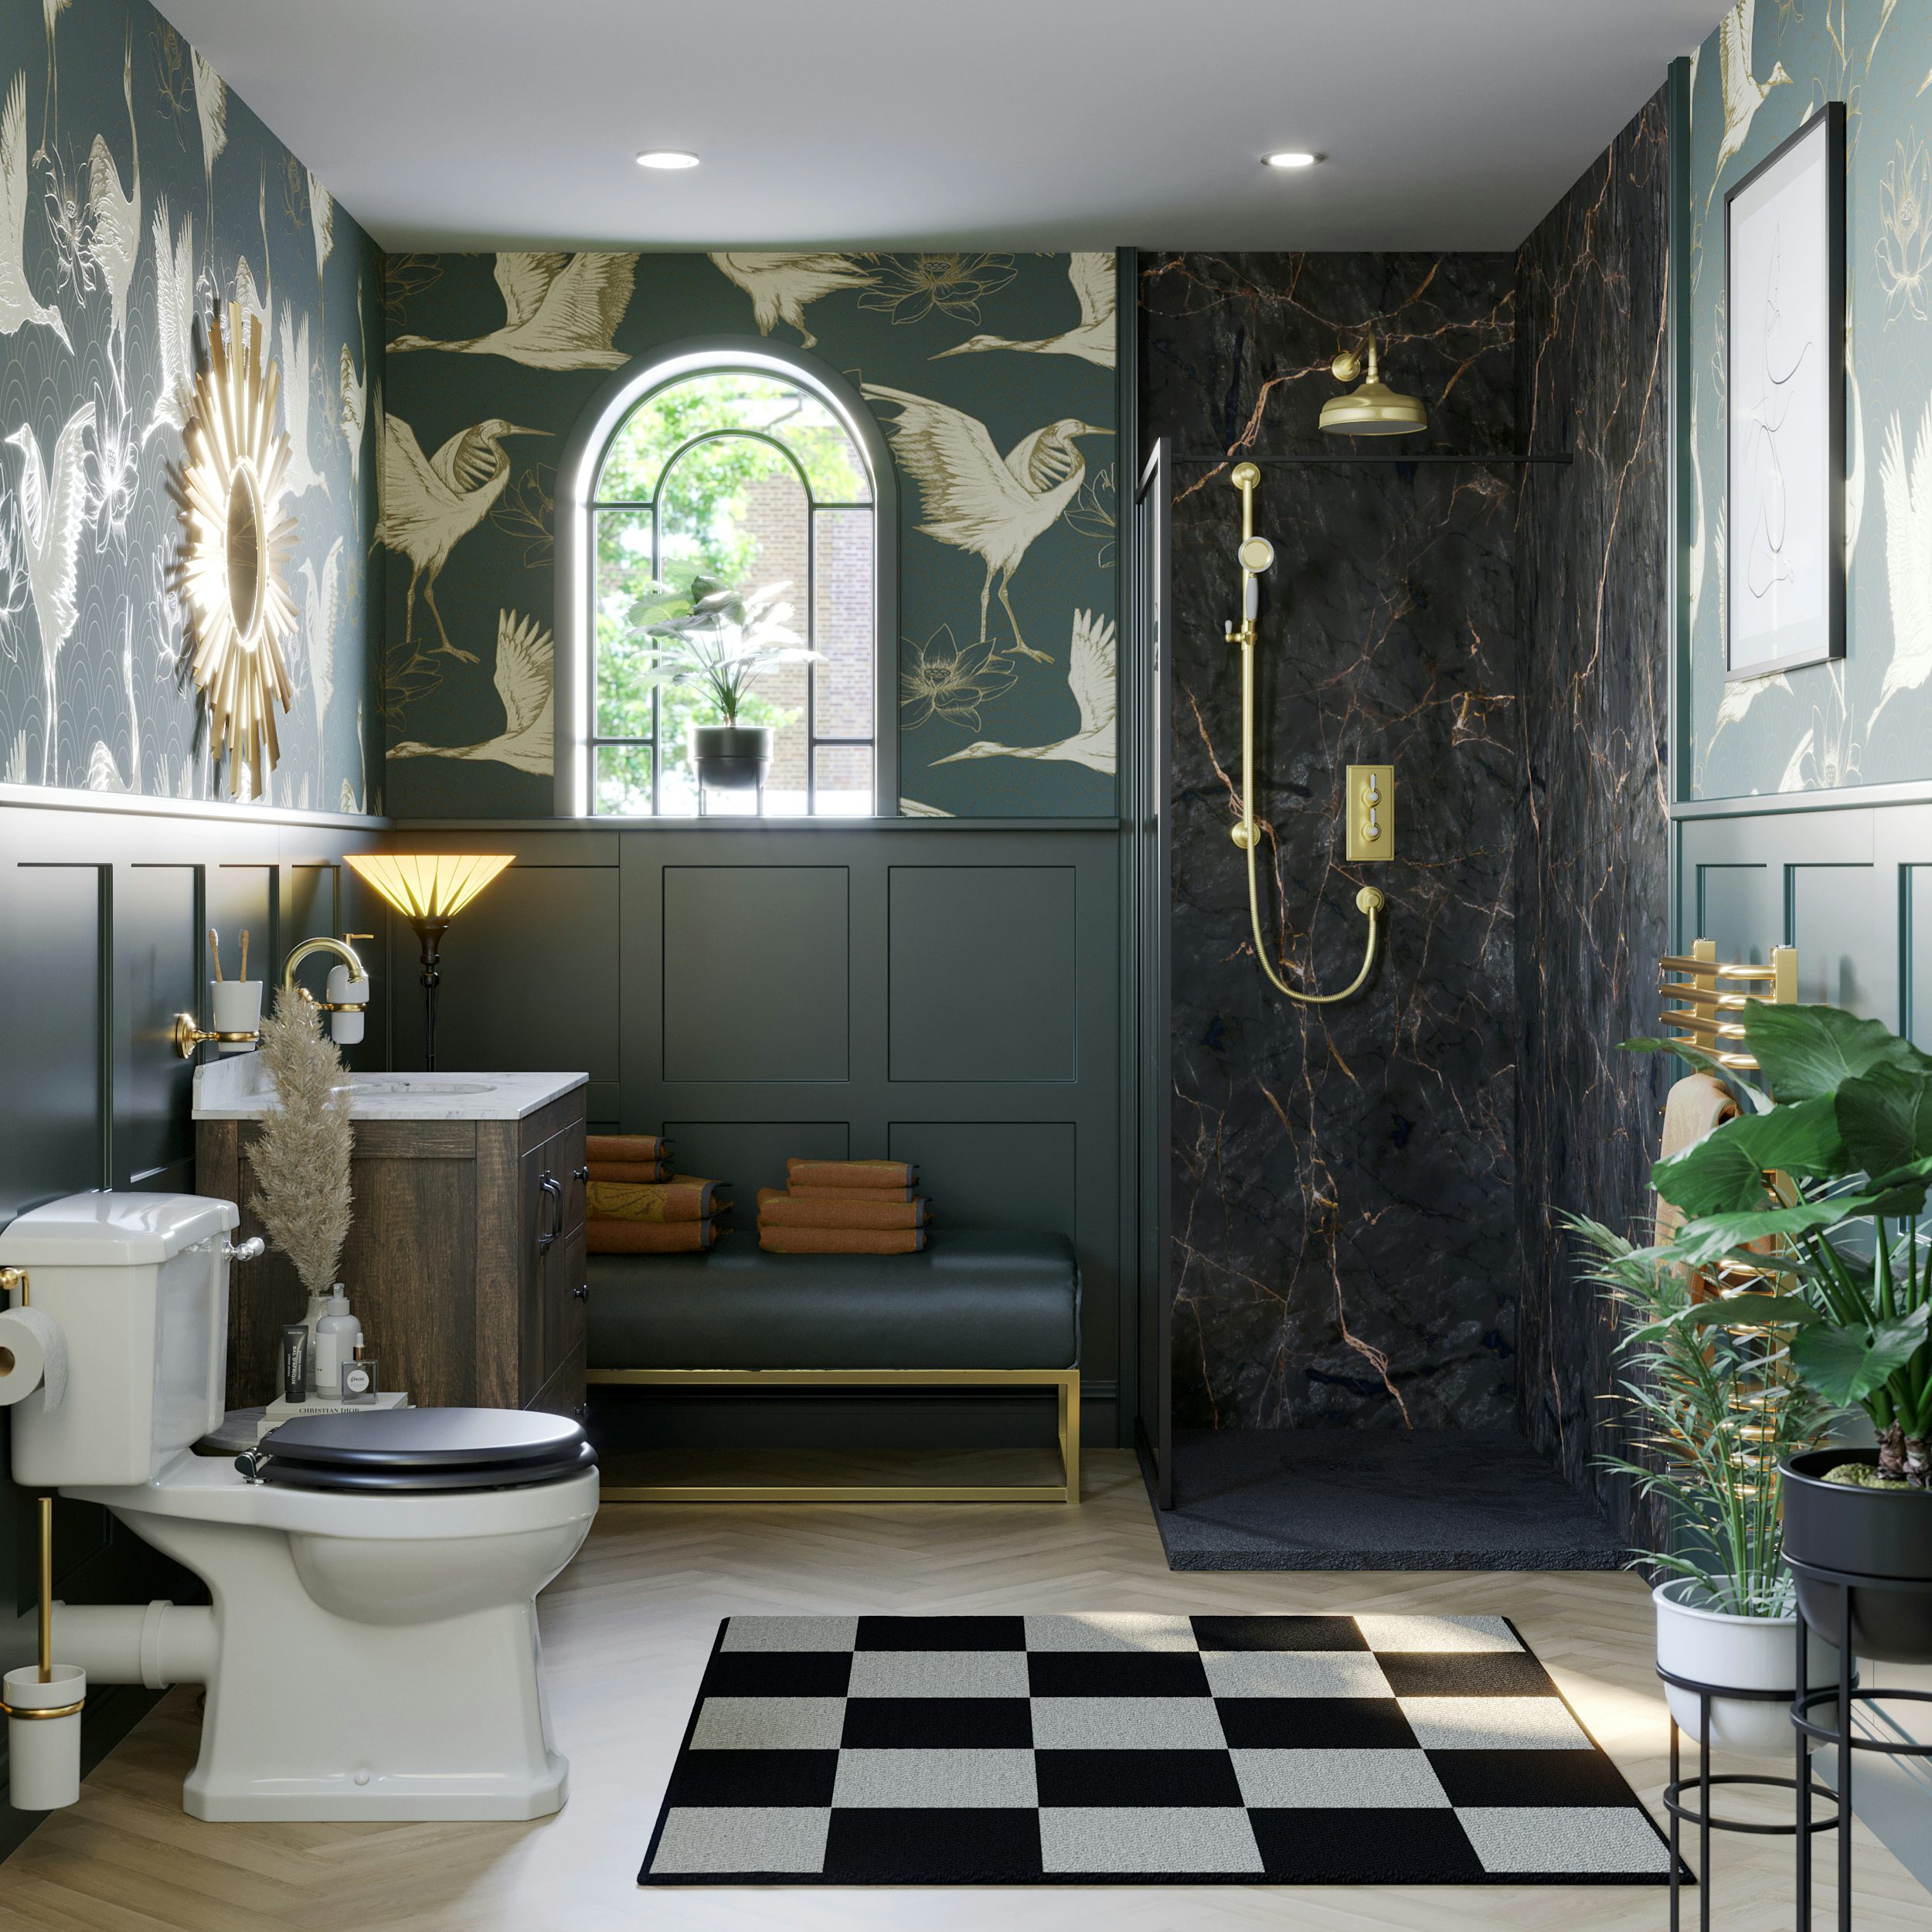 Our Art Deco Reimagined ensuite or small bathroom